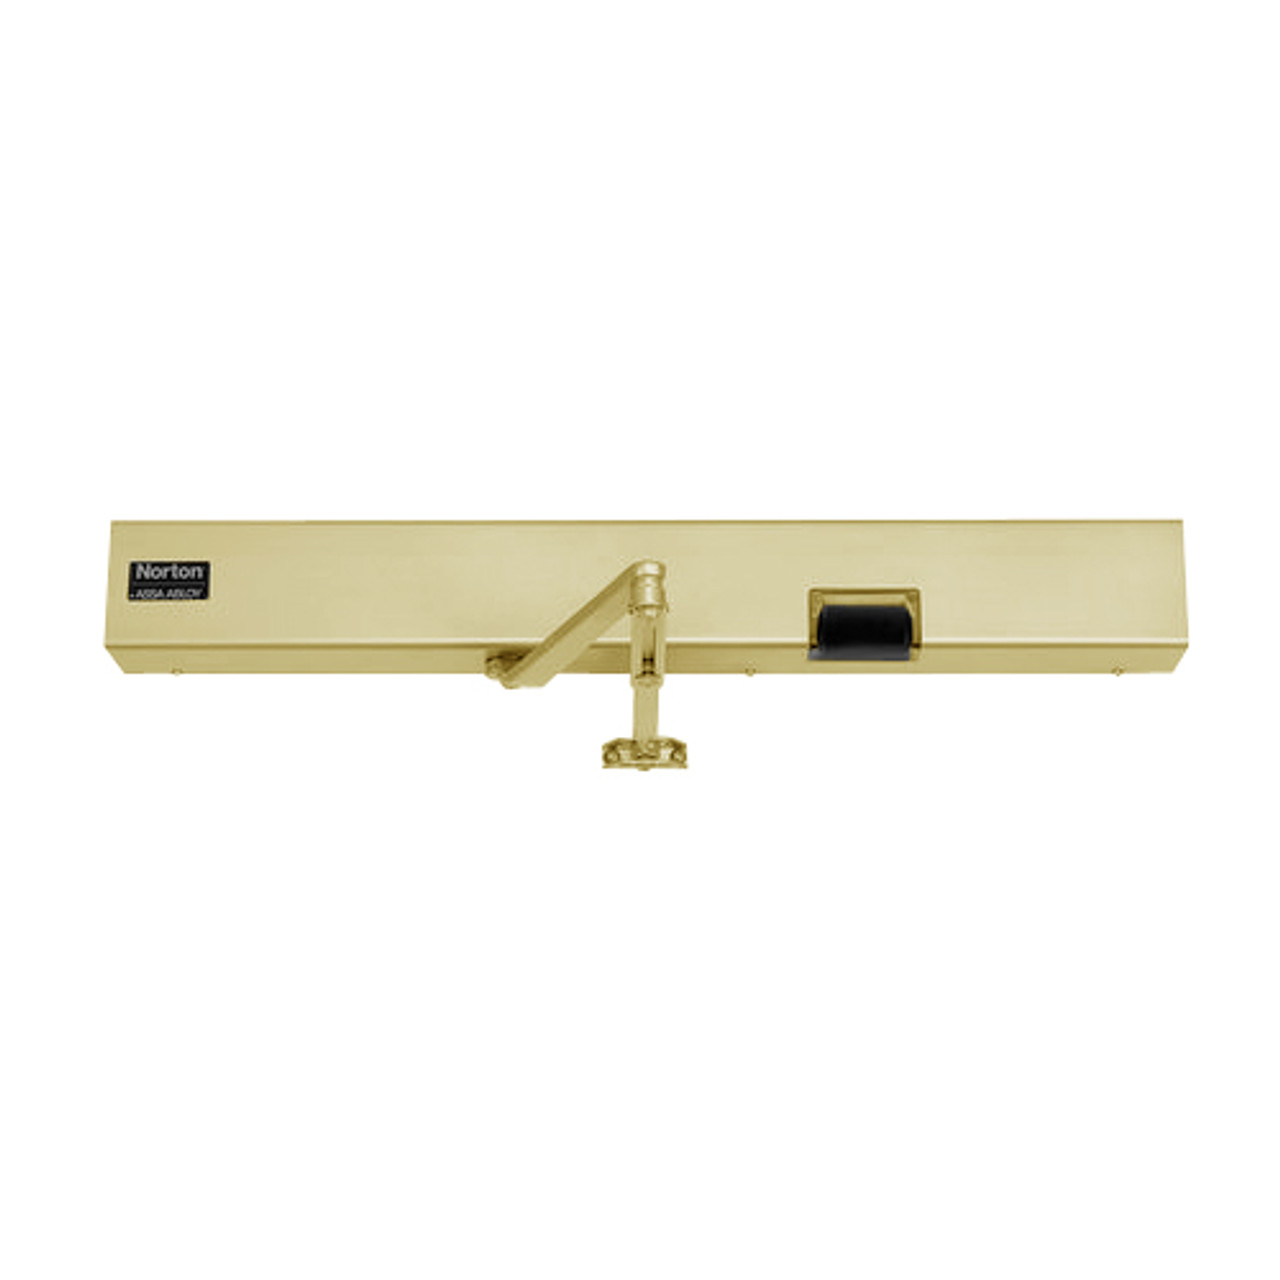 7123SZ-LH-120VAC-696 Norton 7100SZ Series Safe Zone Multi-Point Closer/Holder with Motion Sensor and Push Side Double Lever 11 inch Main Arm in Gold Finish